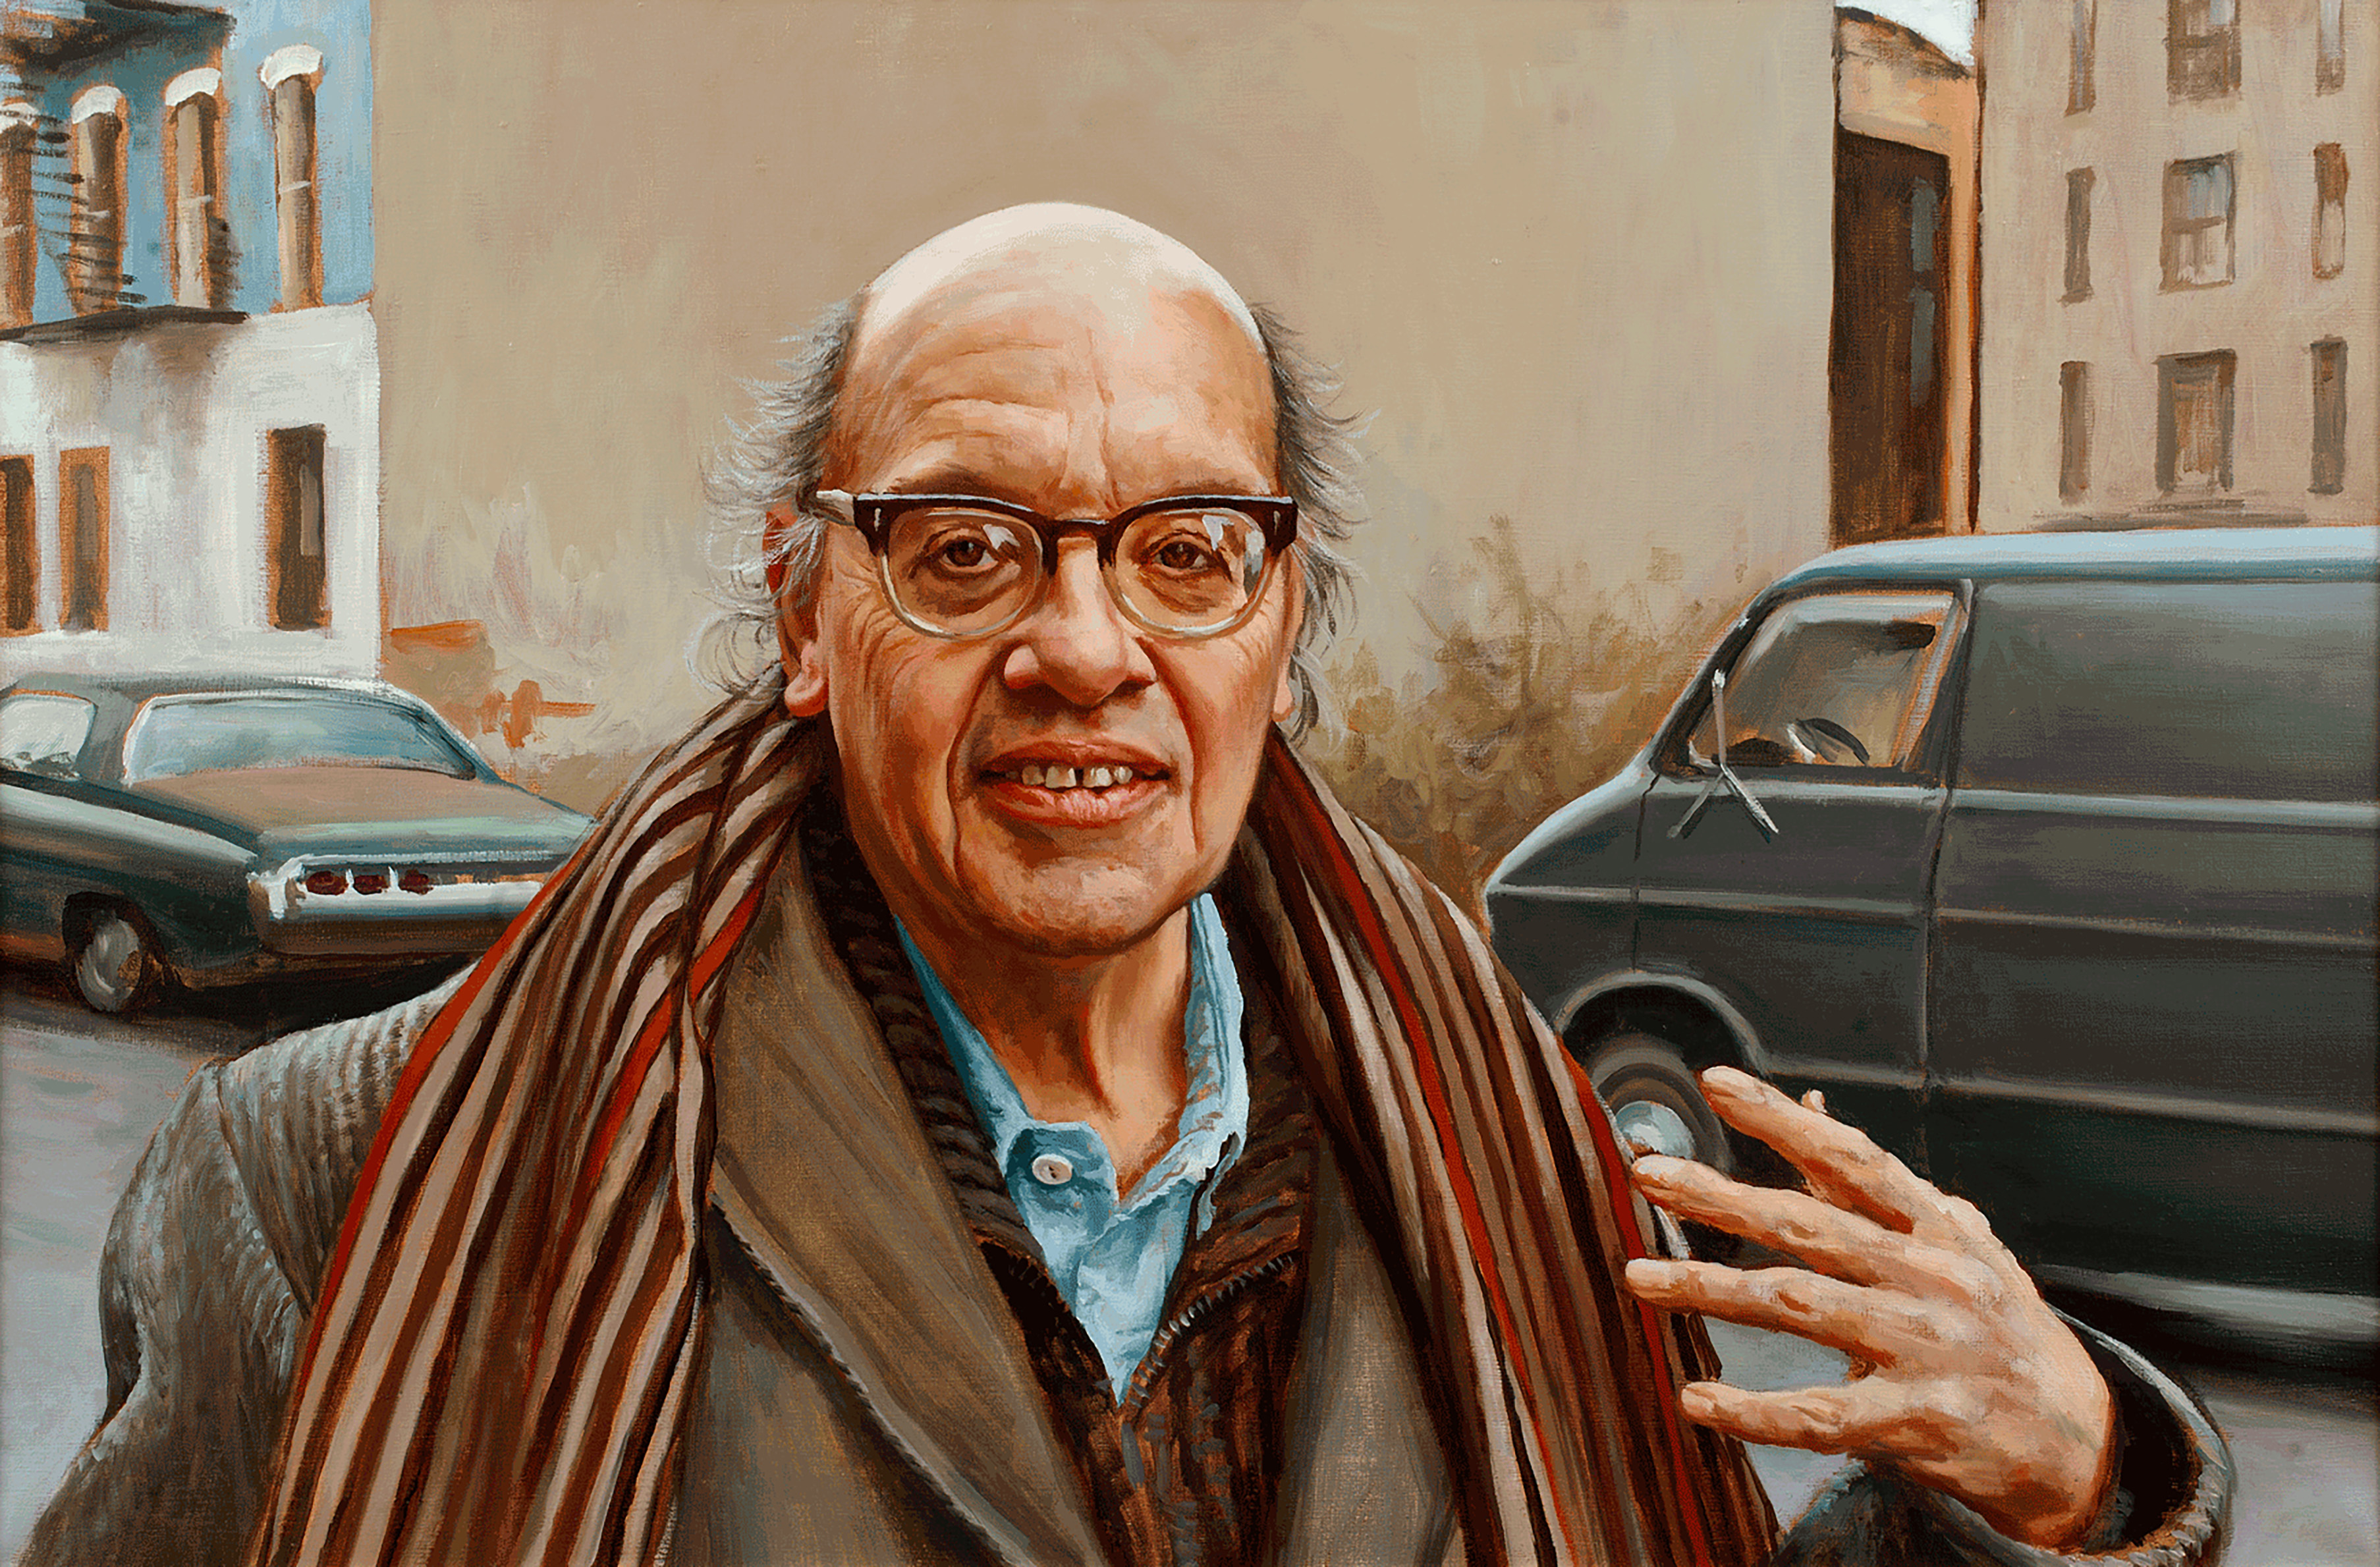  Gearld Stern on 11th St.; oil on linen, 20 x 30  inches, 1990 